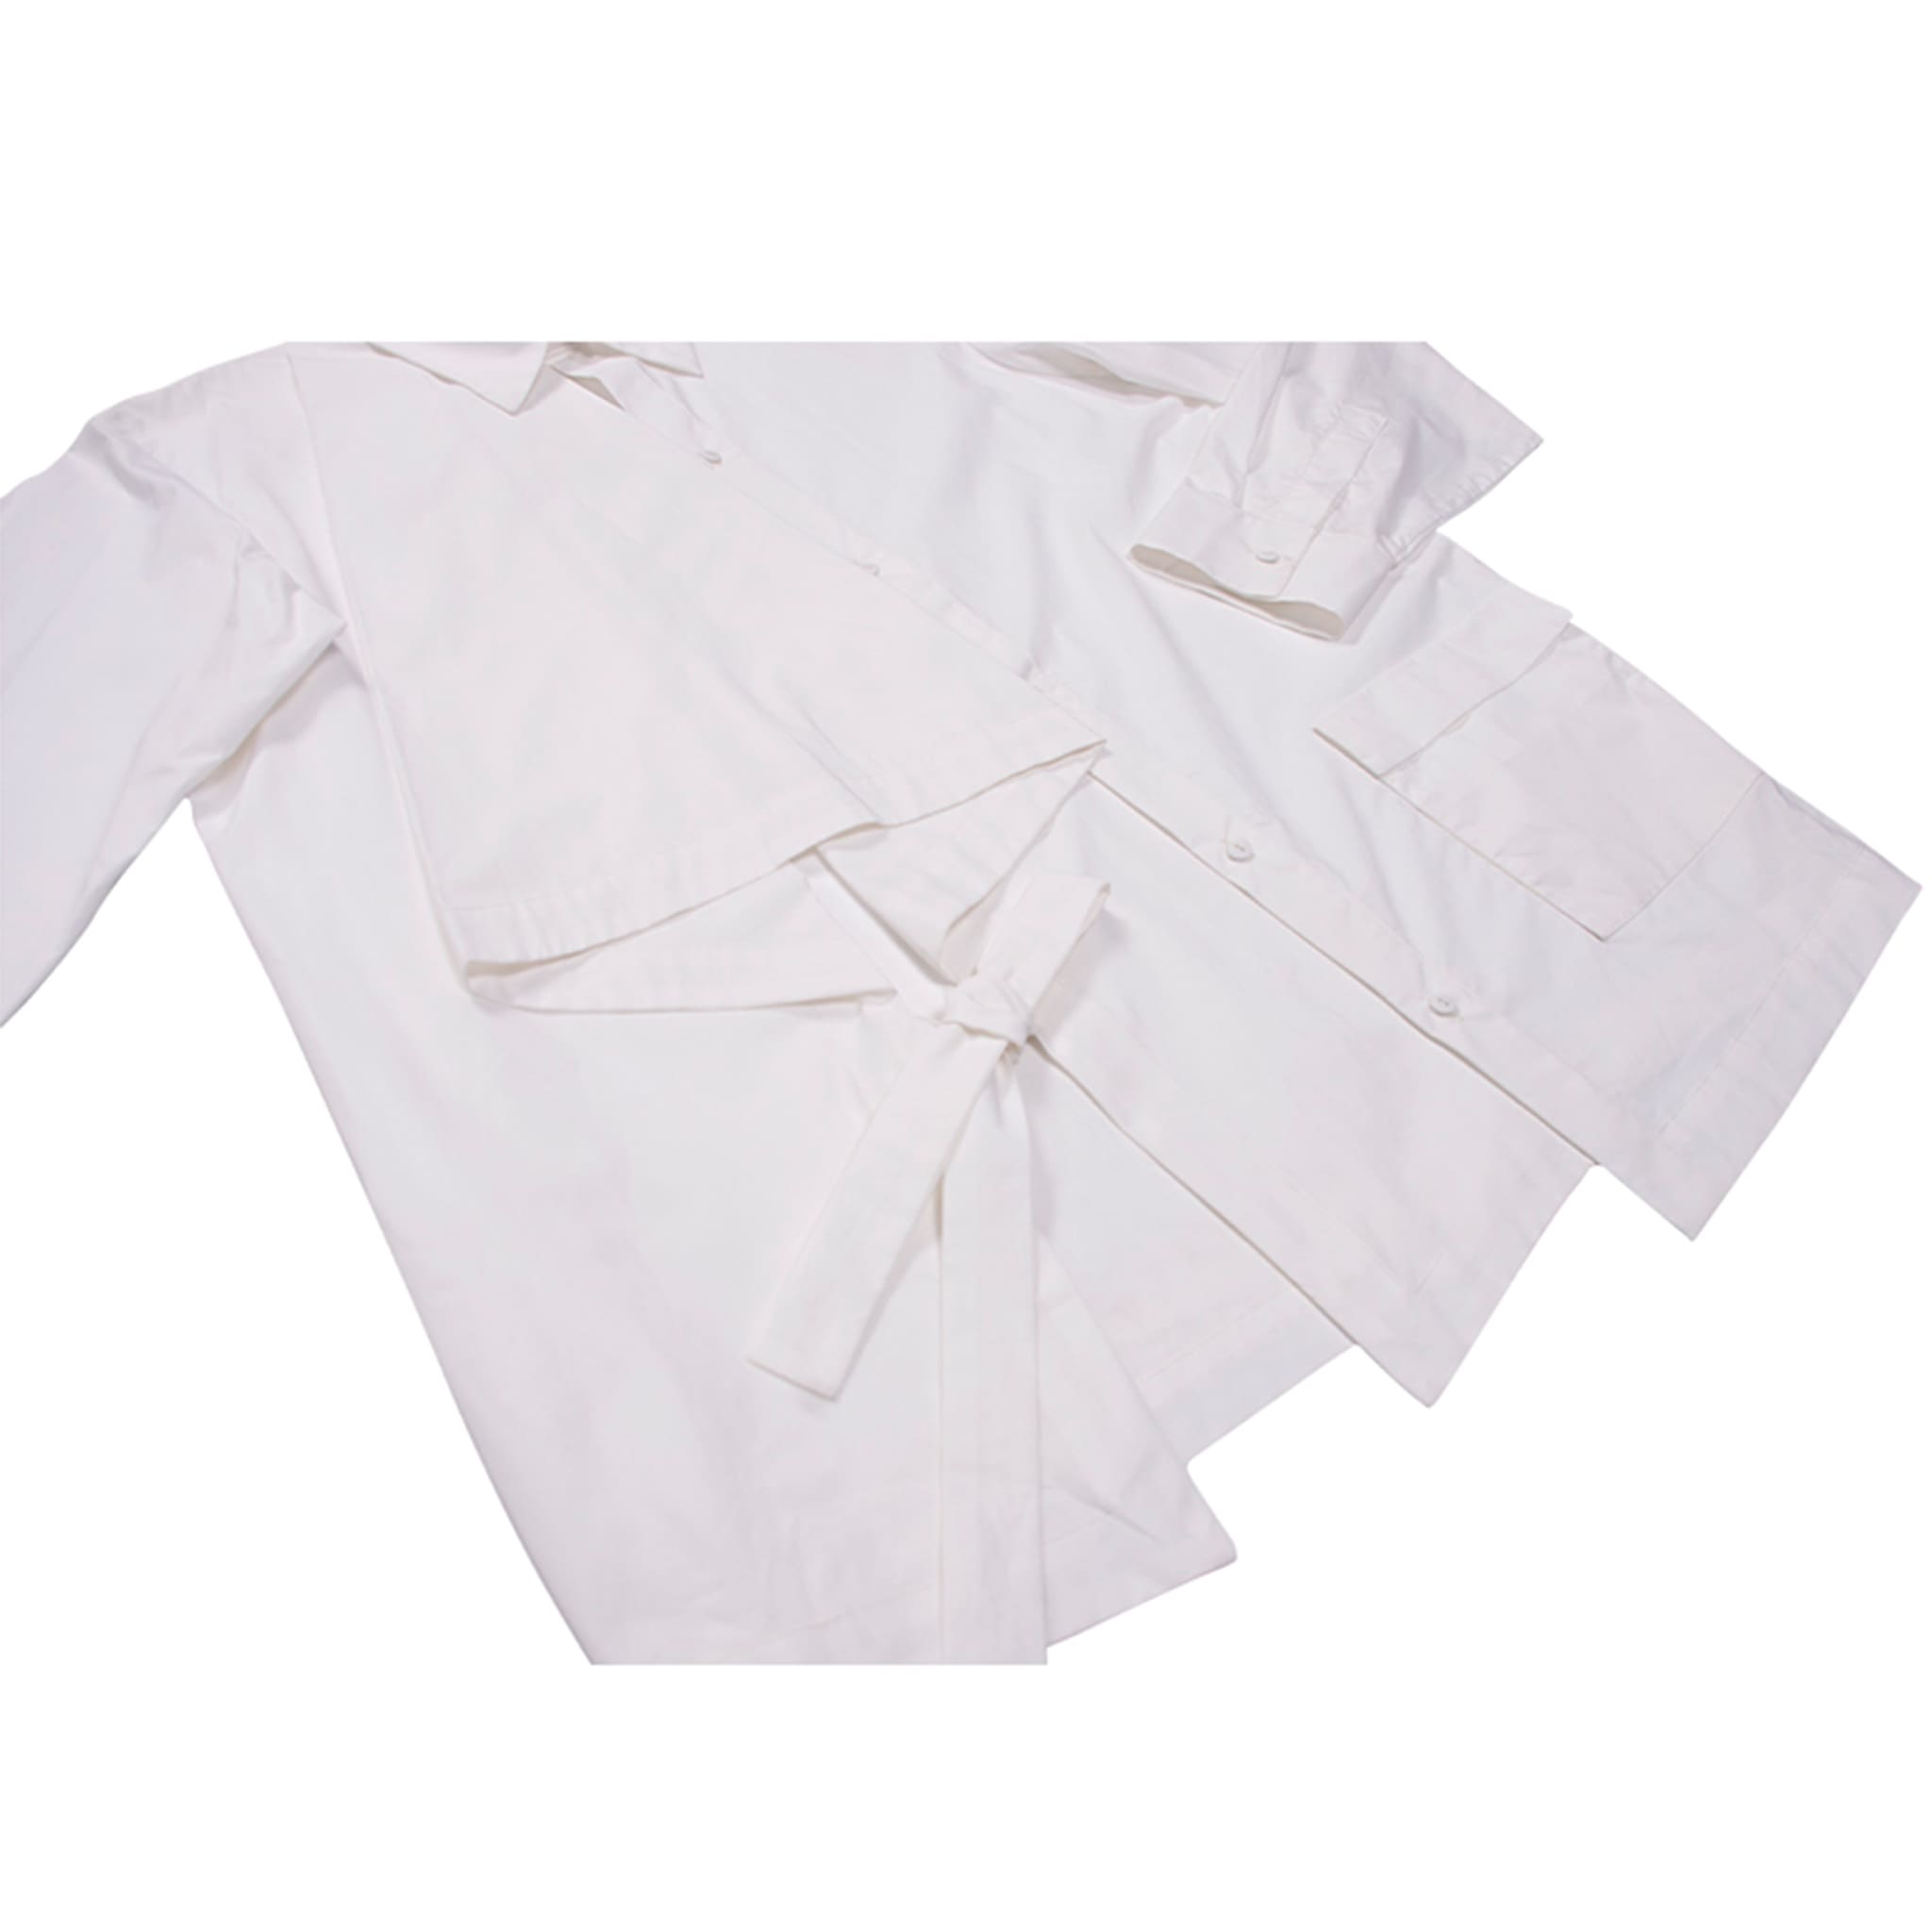 Paper Airplane Deconstructed Shirt